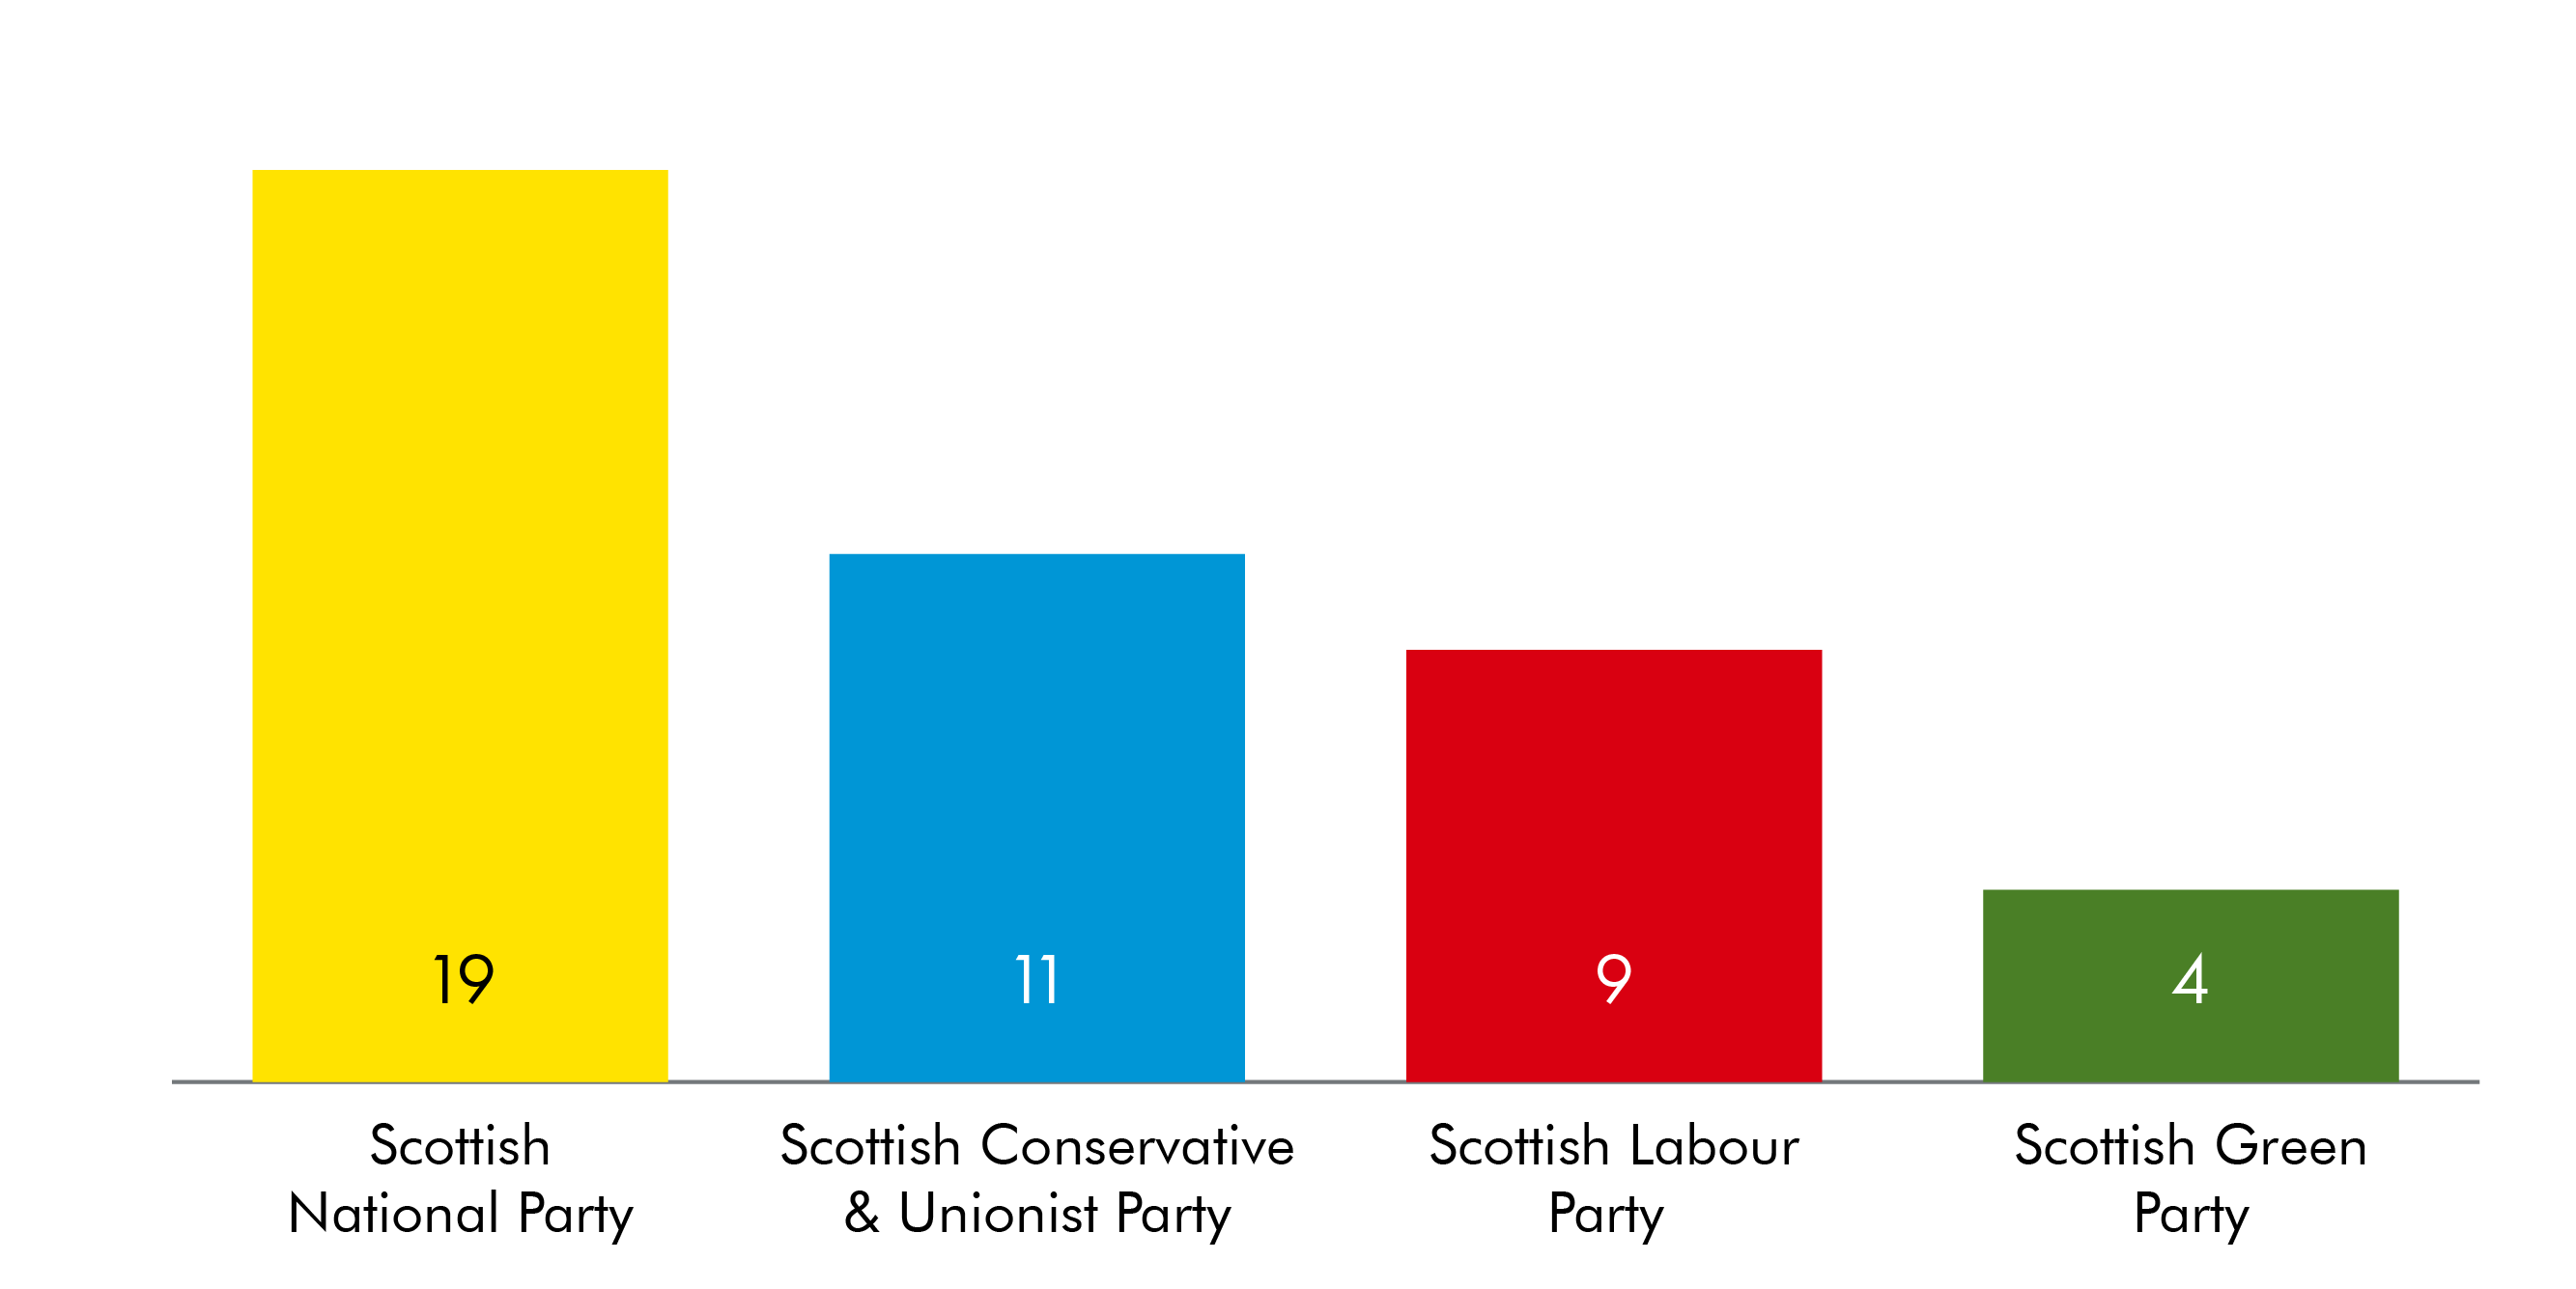 The SNP have 19 new member, the Conservatives 11, Labour 9 and the Green Party 4